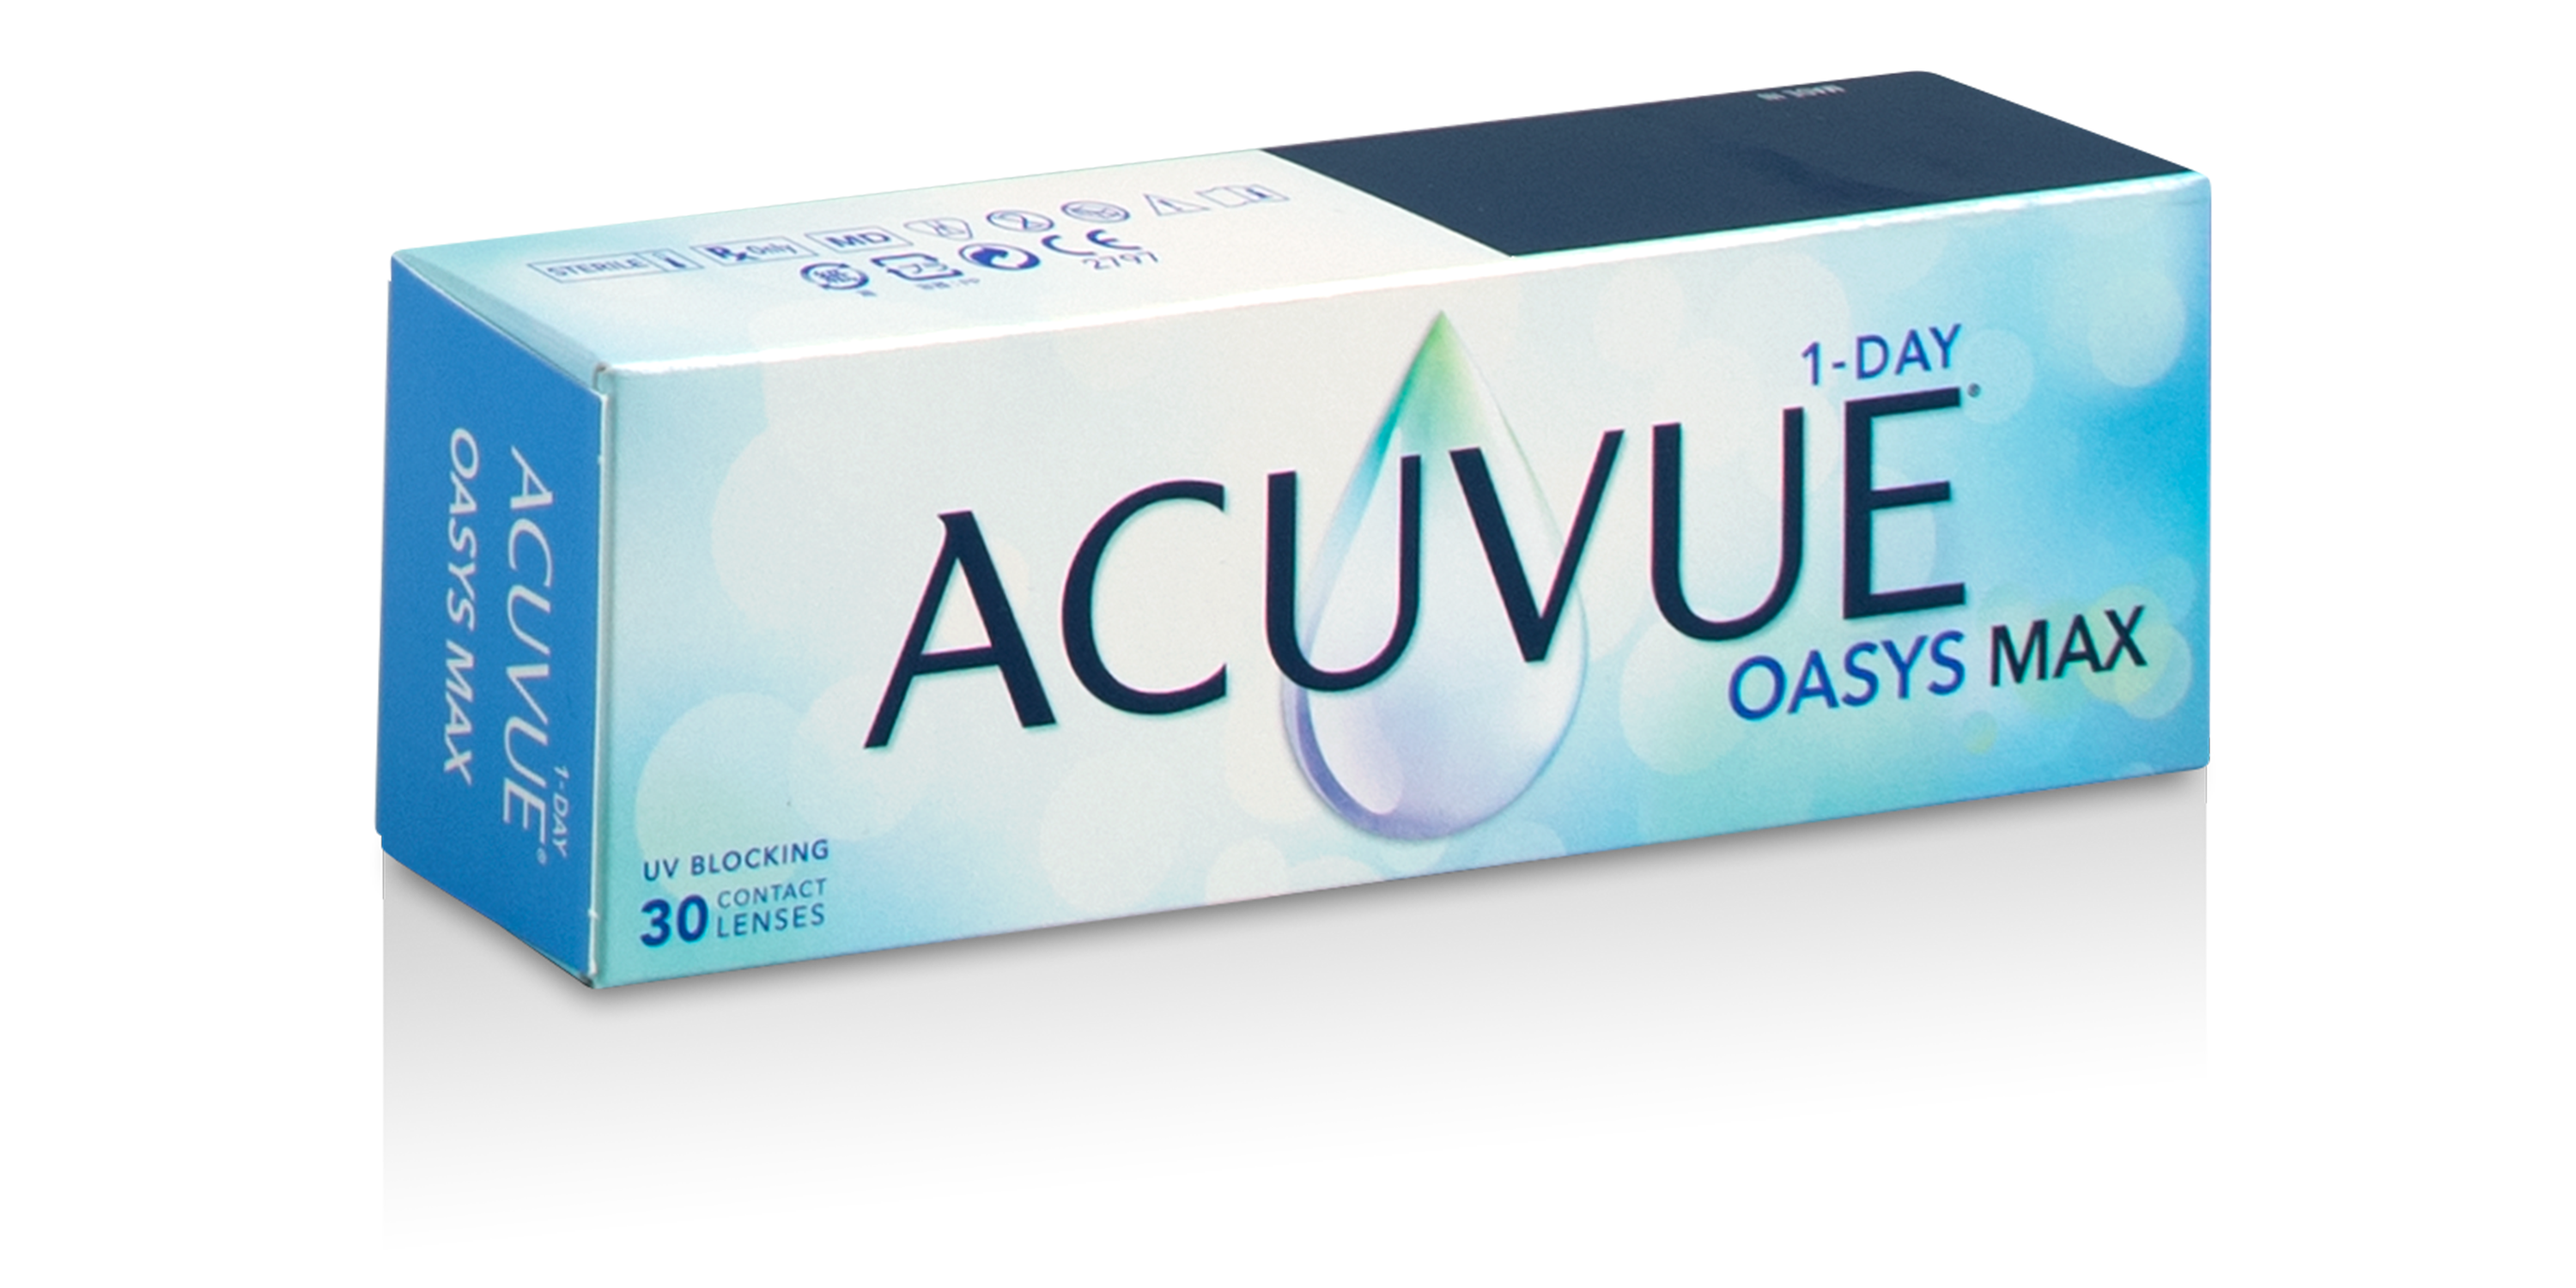 ACUVUE® OASYS MAX 1-DAY, 30 PACK